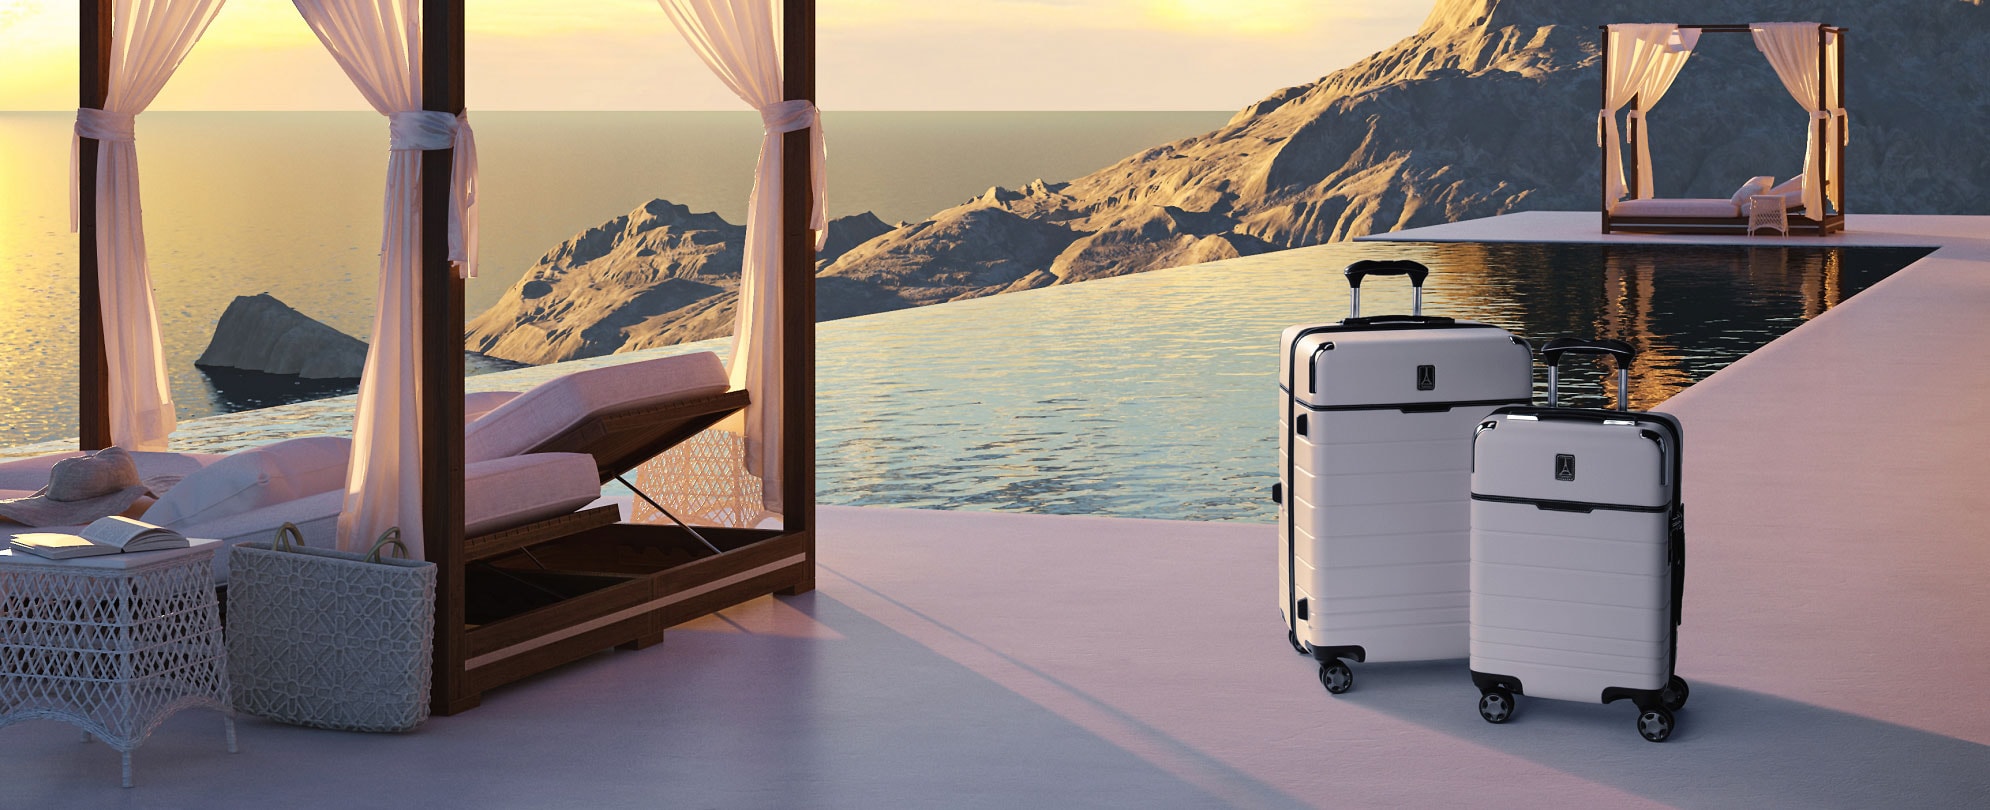 2 TravelPro x Travel + Leisure suitcases sitting by an oceanfront infinity pool and cabana.